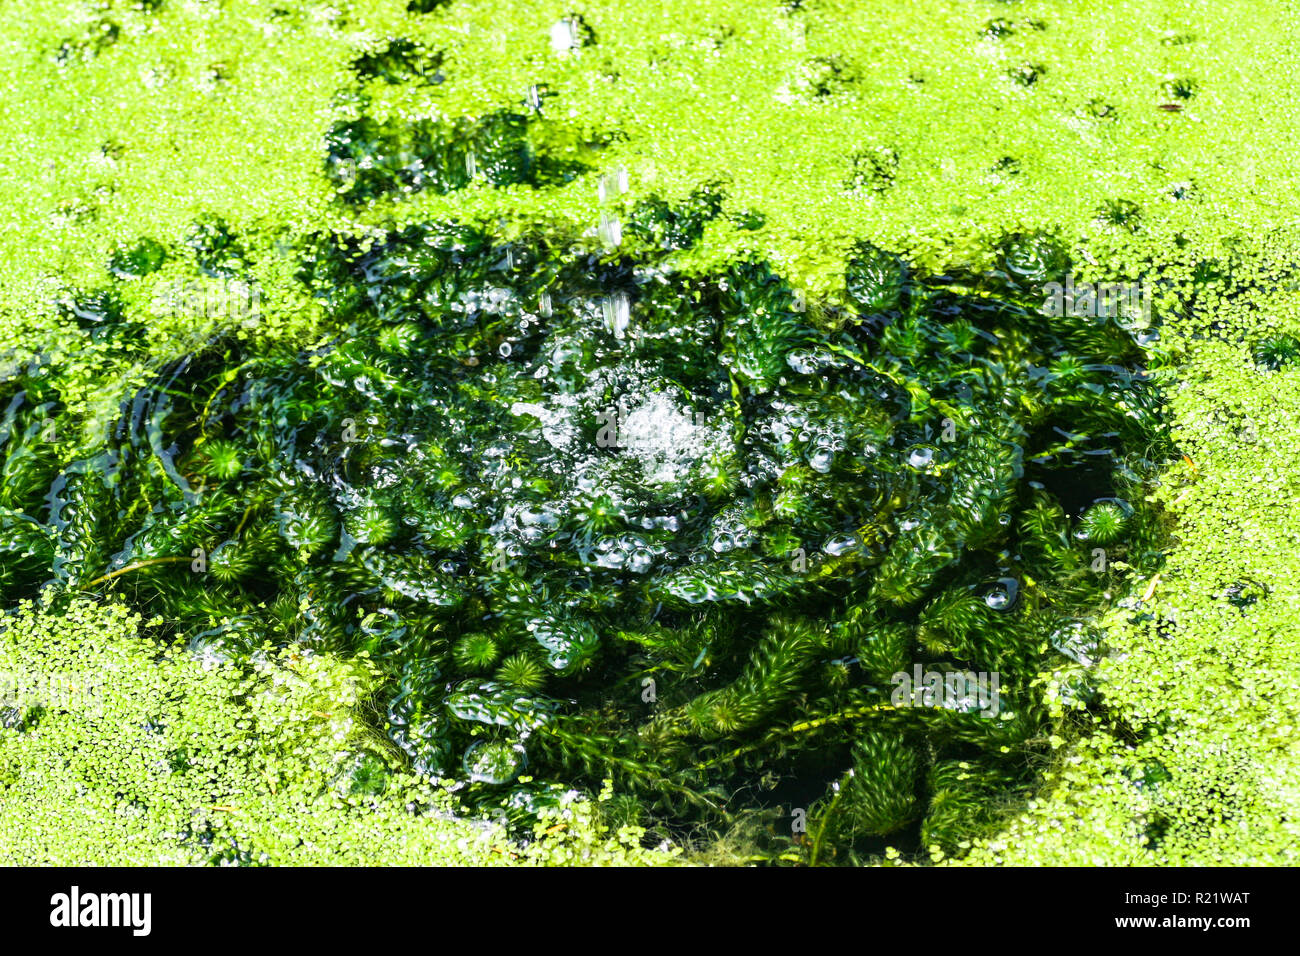 A lot of pondweed in a pond Stock Photo